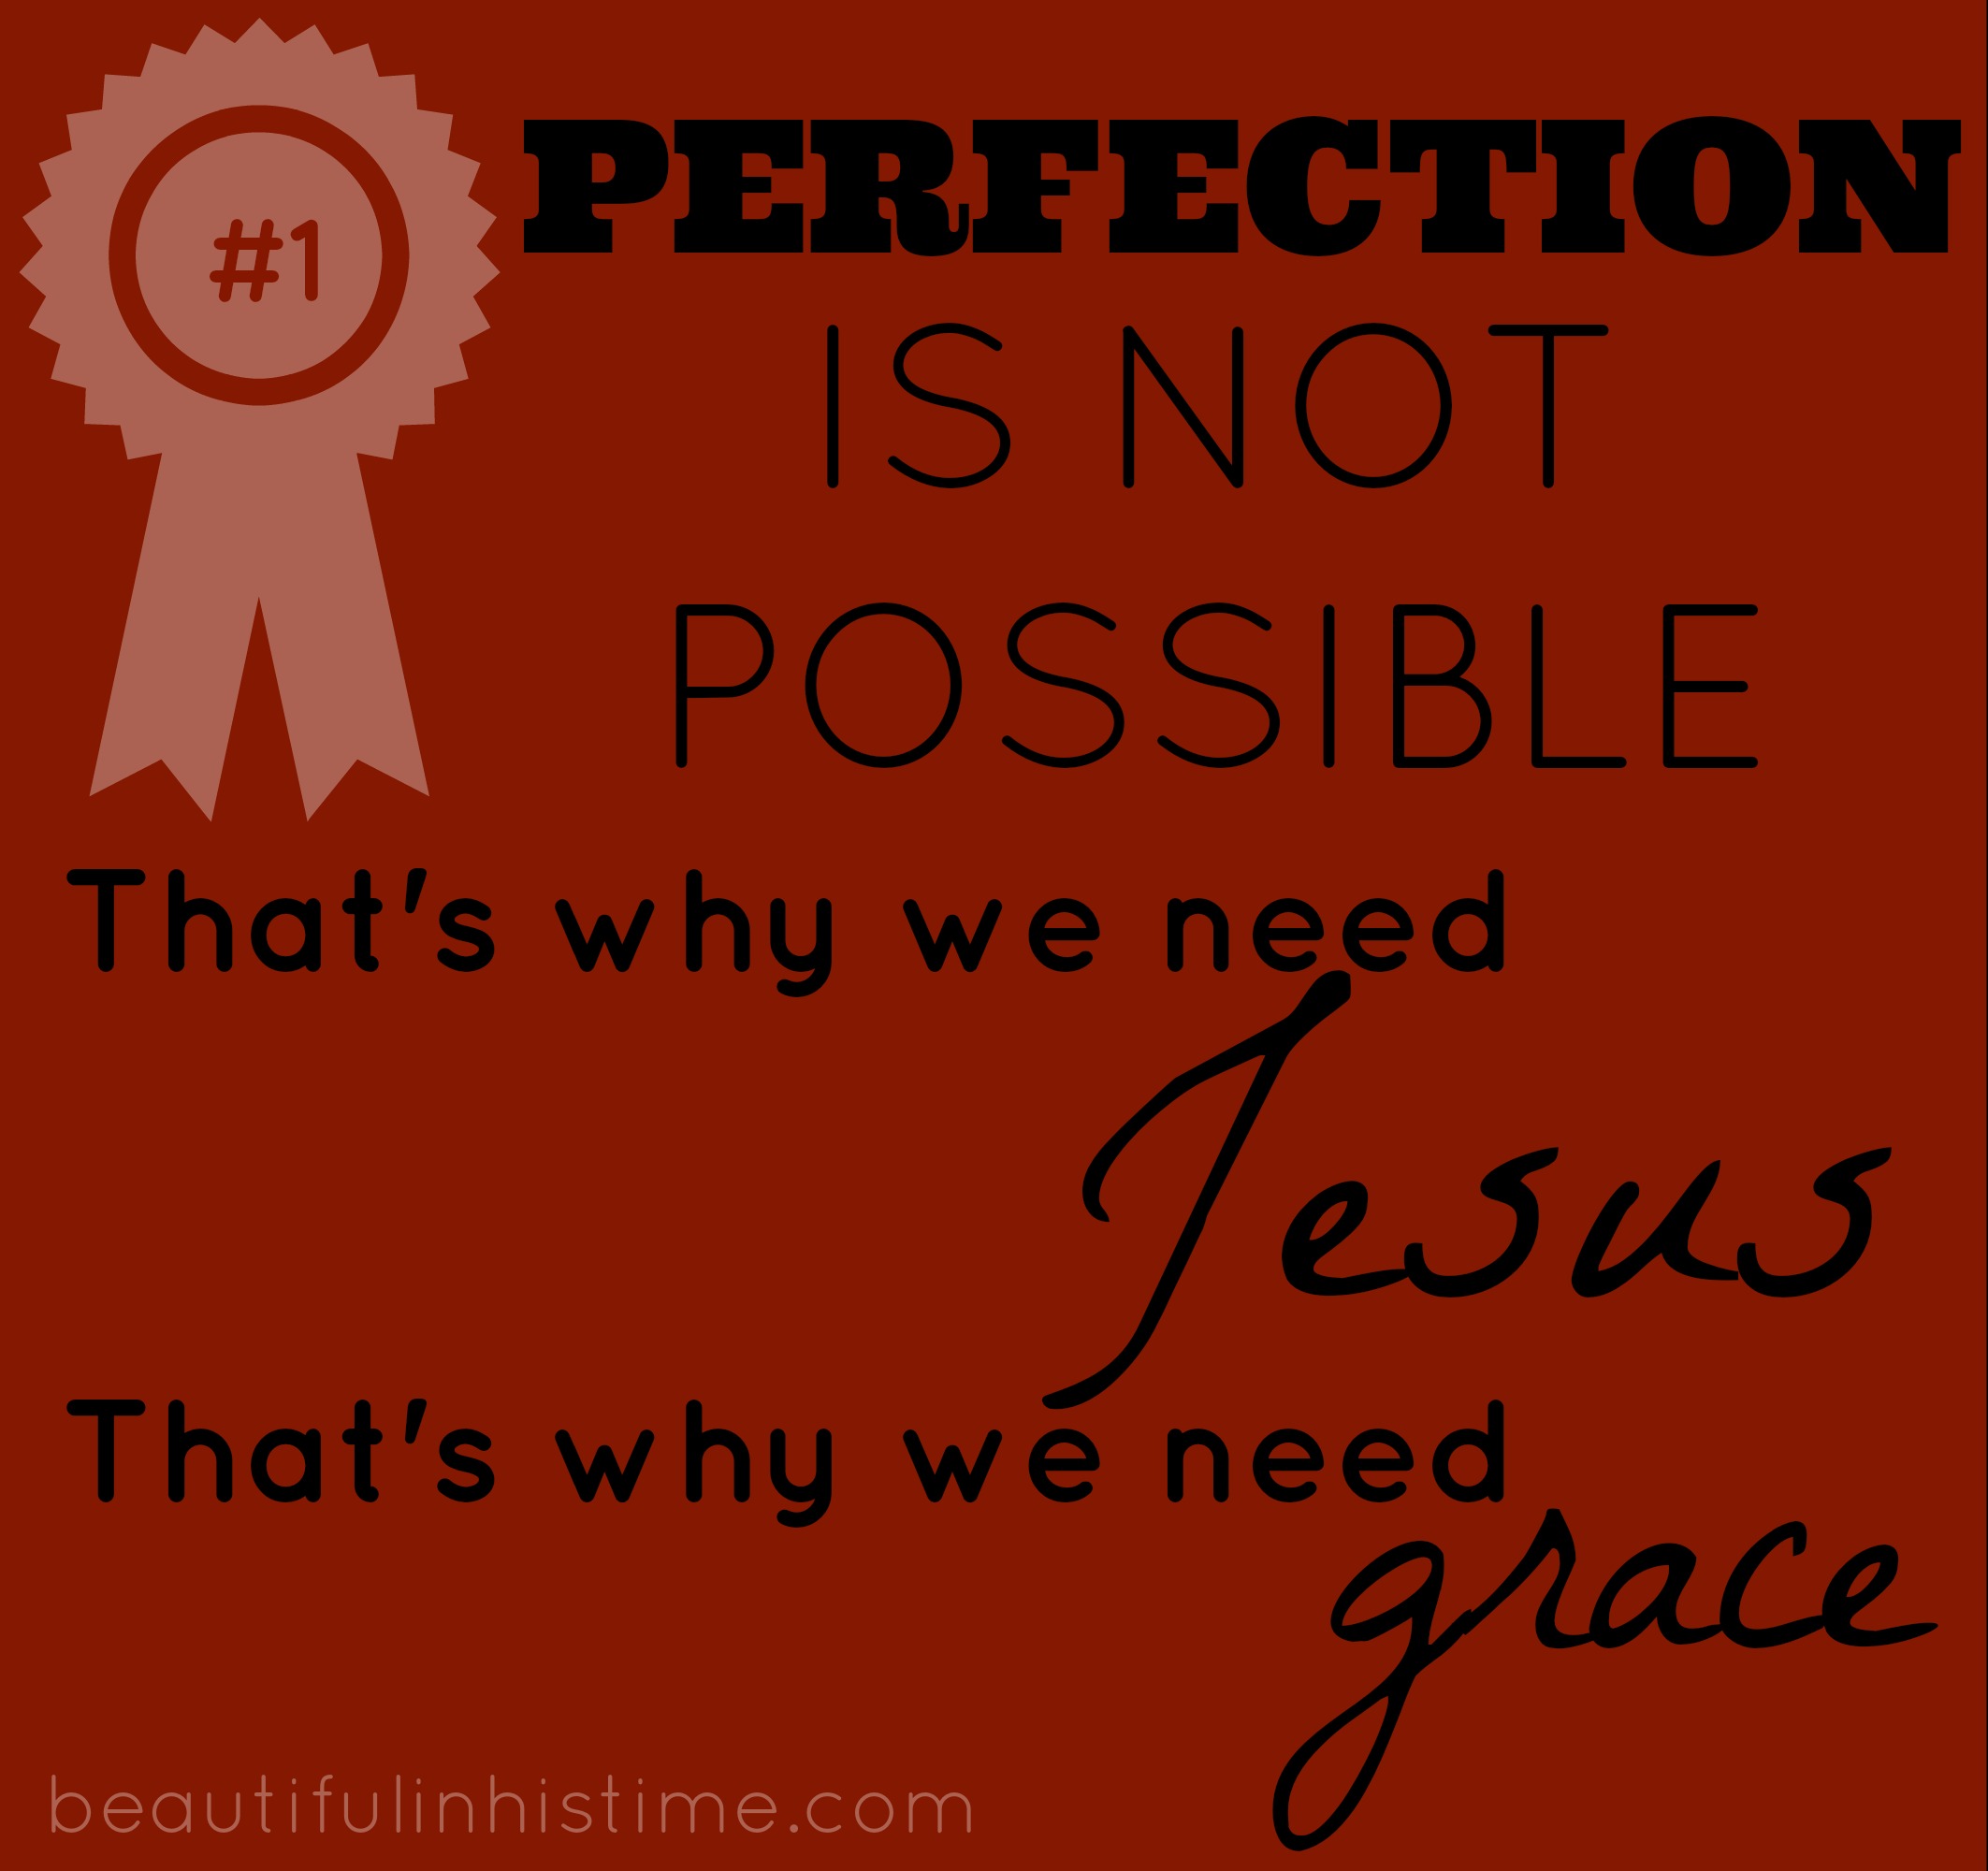 #perfection is not possible {the wilderness between #legalism and #grace - part 7 @beautifulinhistime.com}